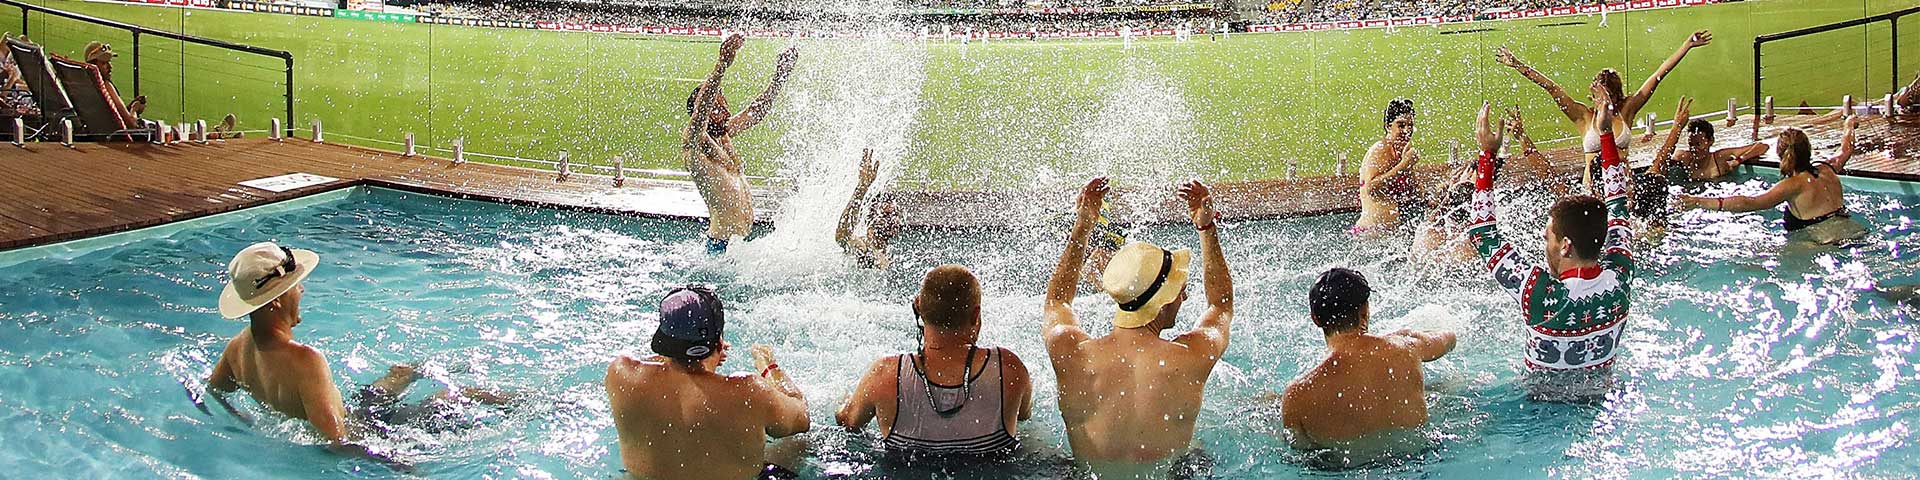 Pool for the Cricket at The Gabba